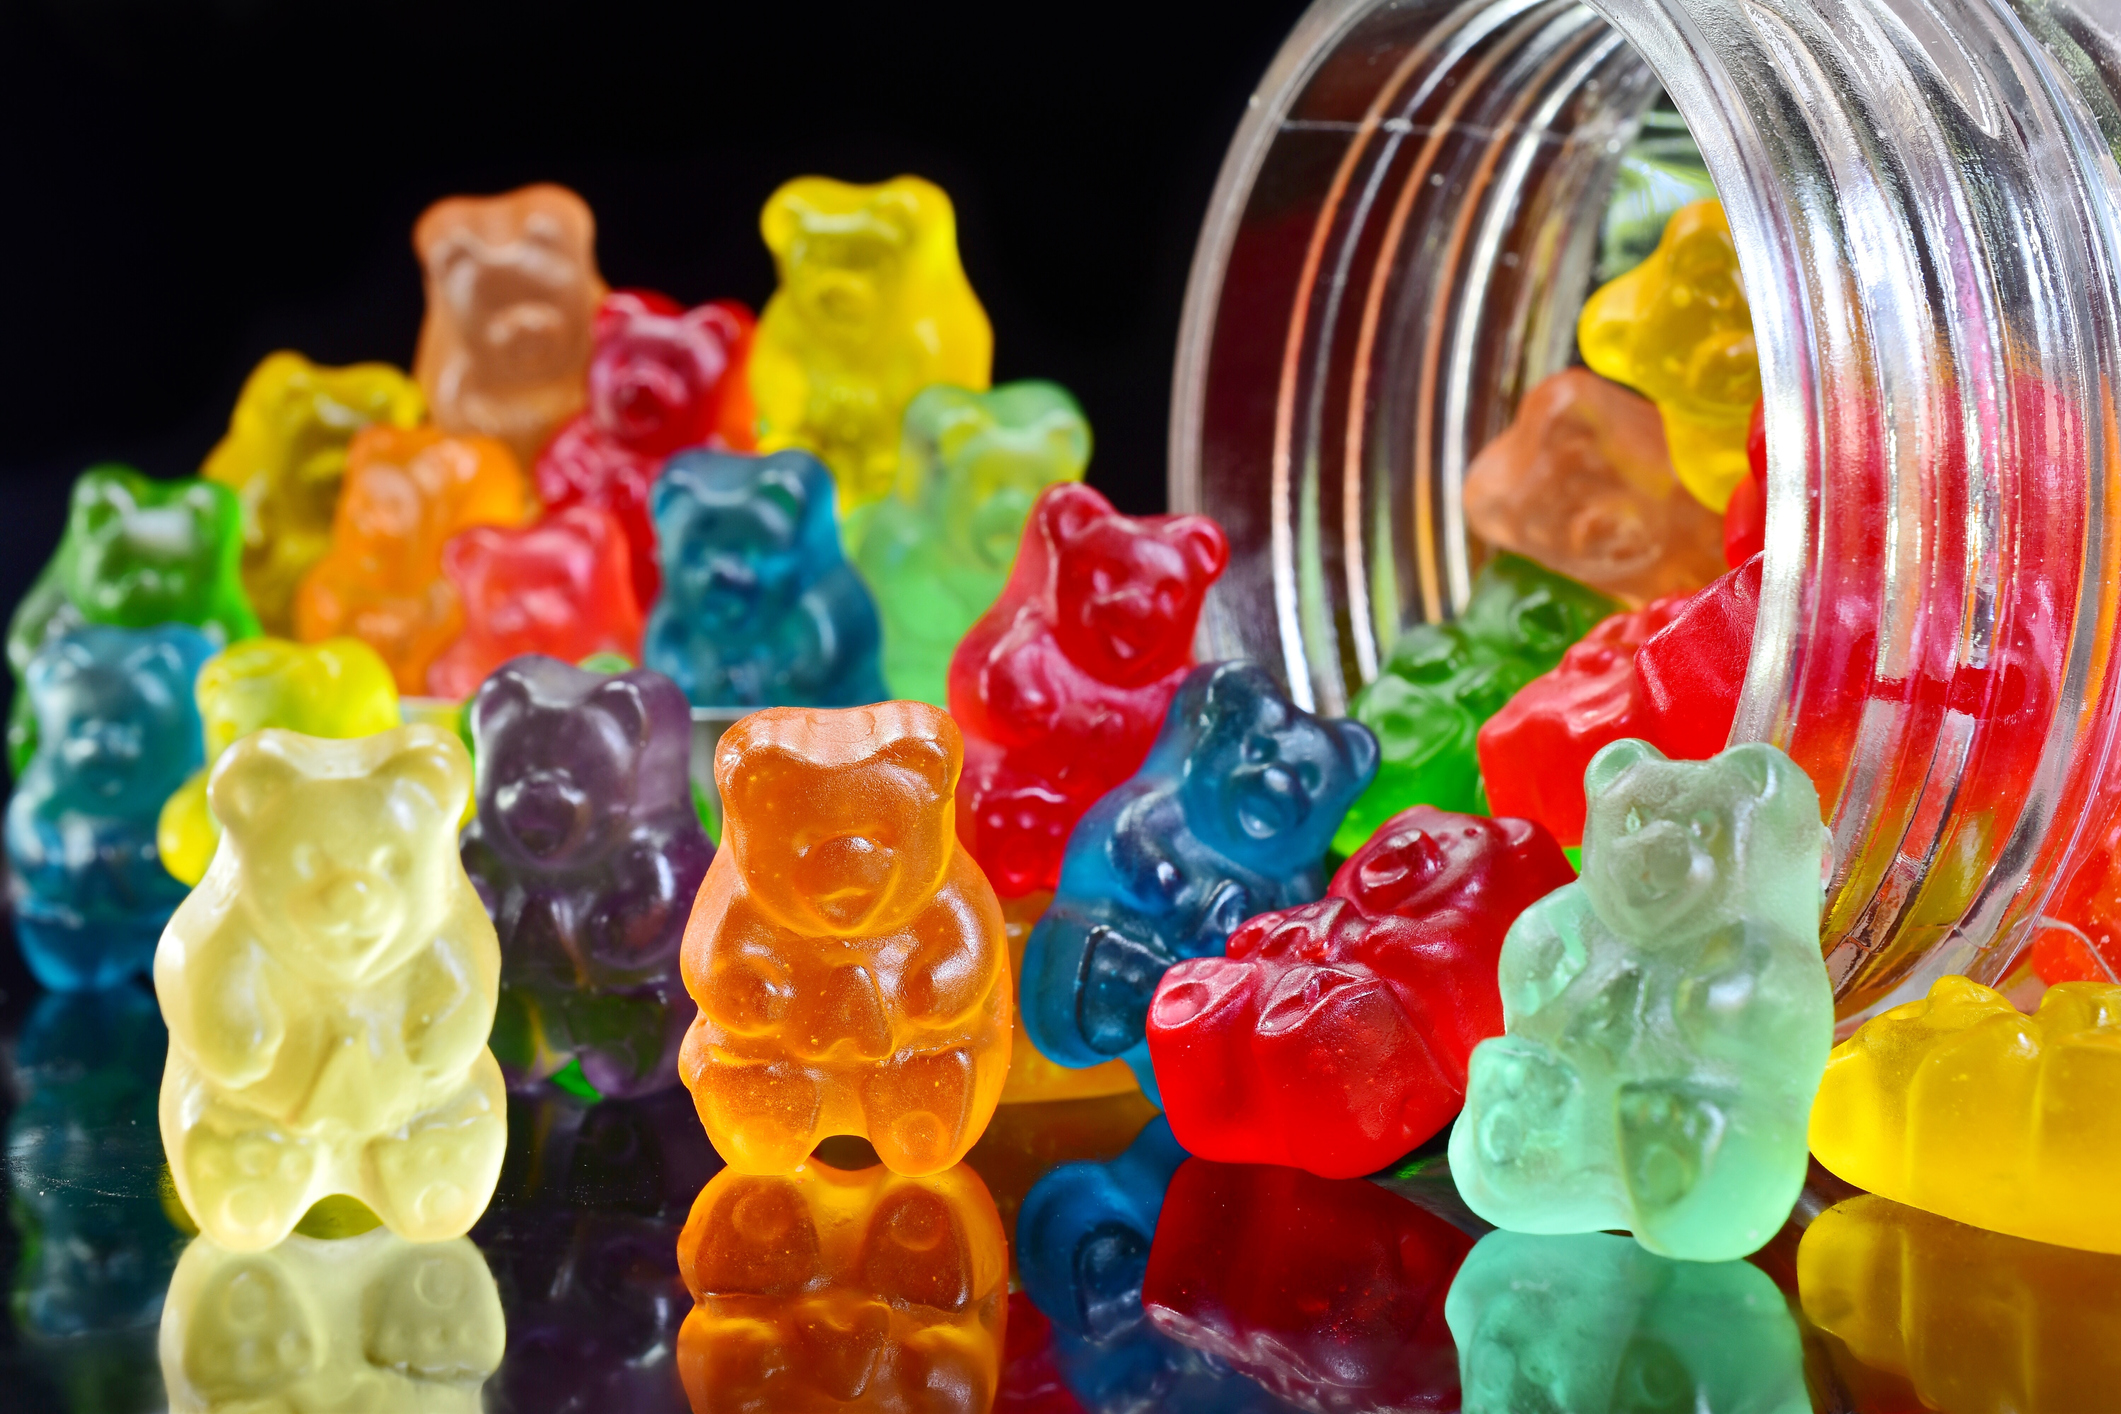 Open glass jar on its side with colorful gummy bears spilling out